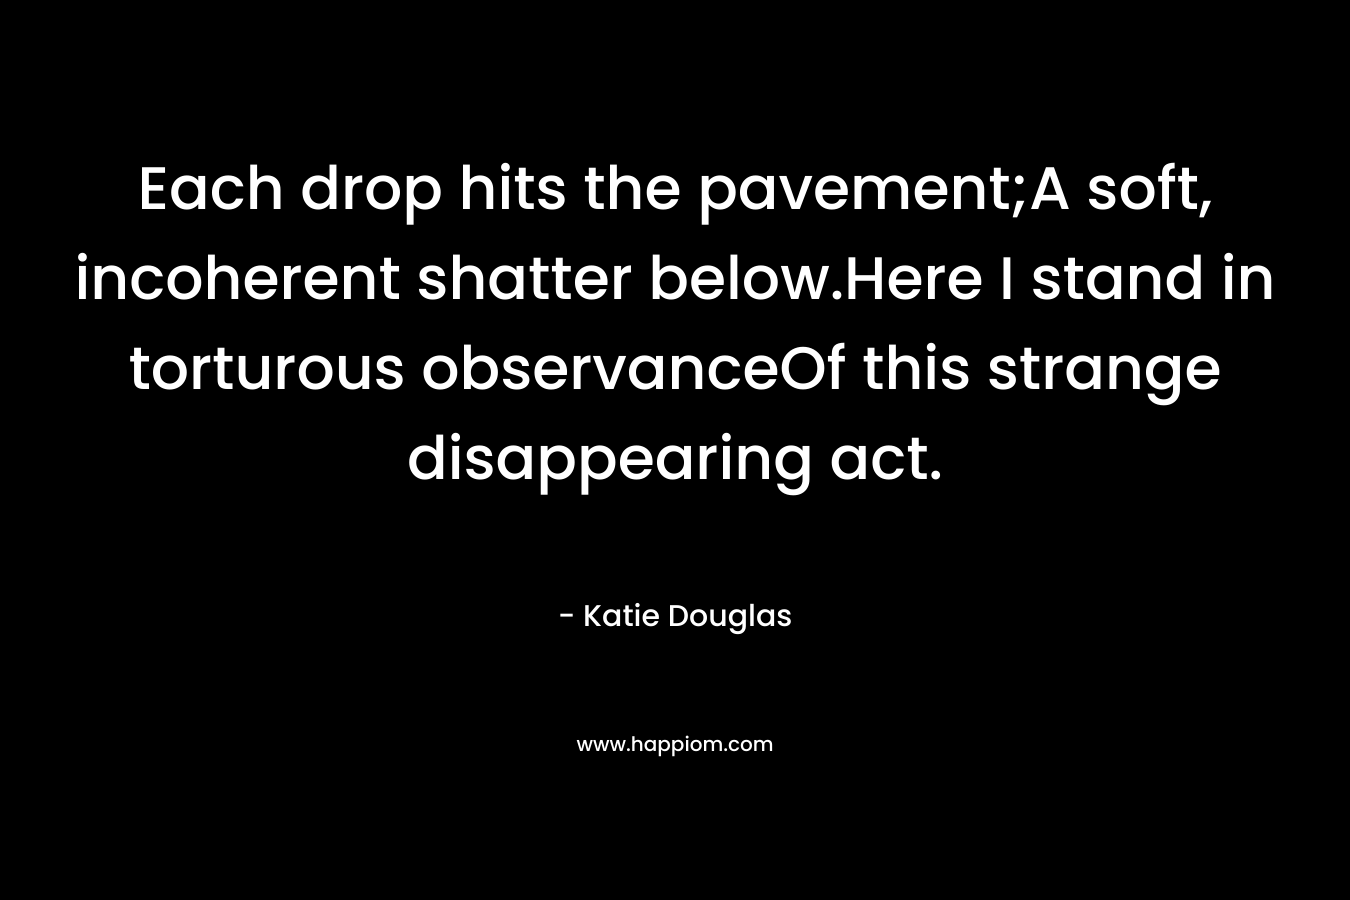 Each drop hits the pavement;A soft, incoherent shatter below.Here I stand in torturous observanceOf this strange disappearing act. – Katie Douglas